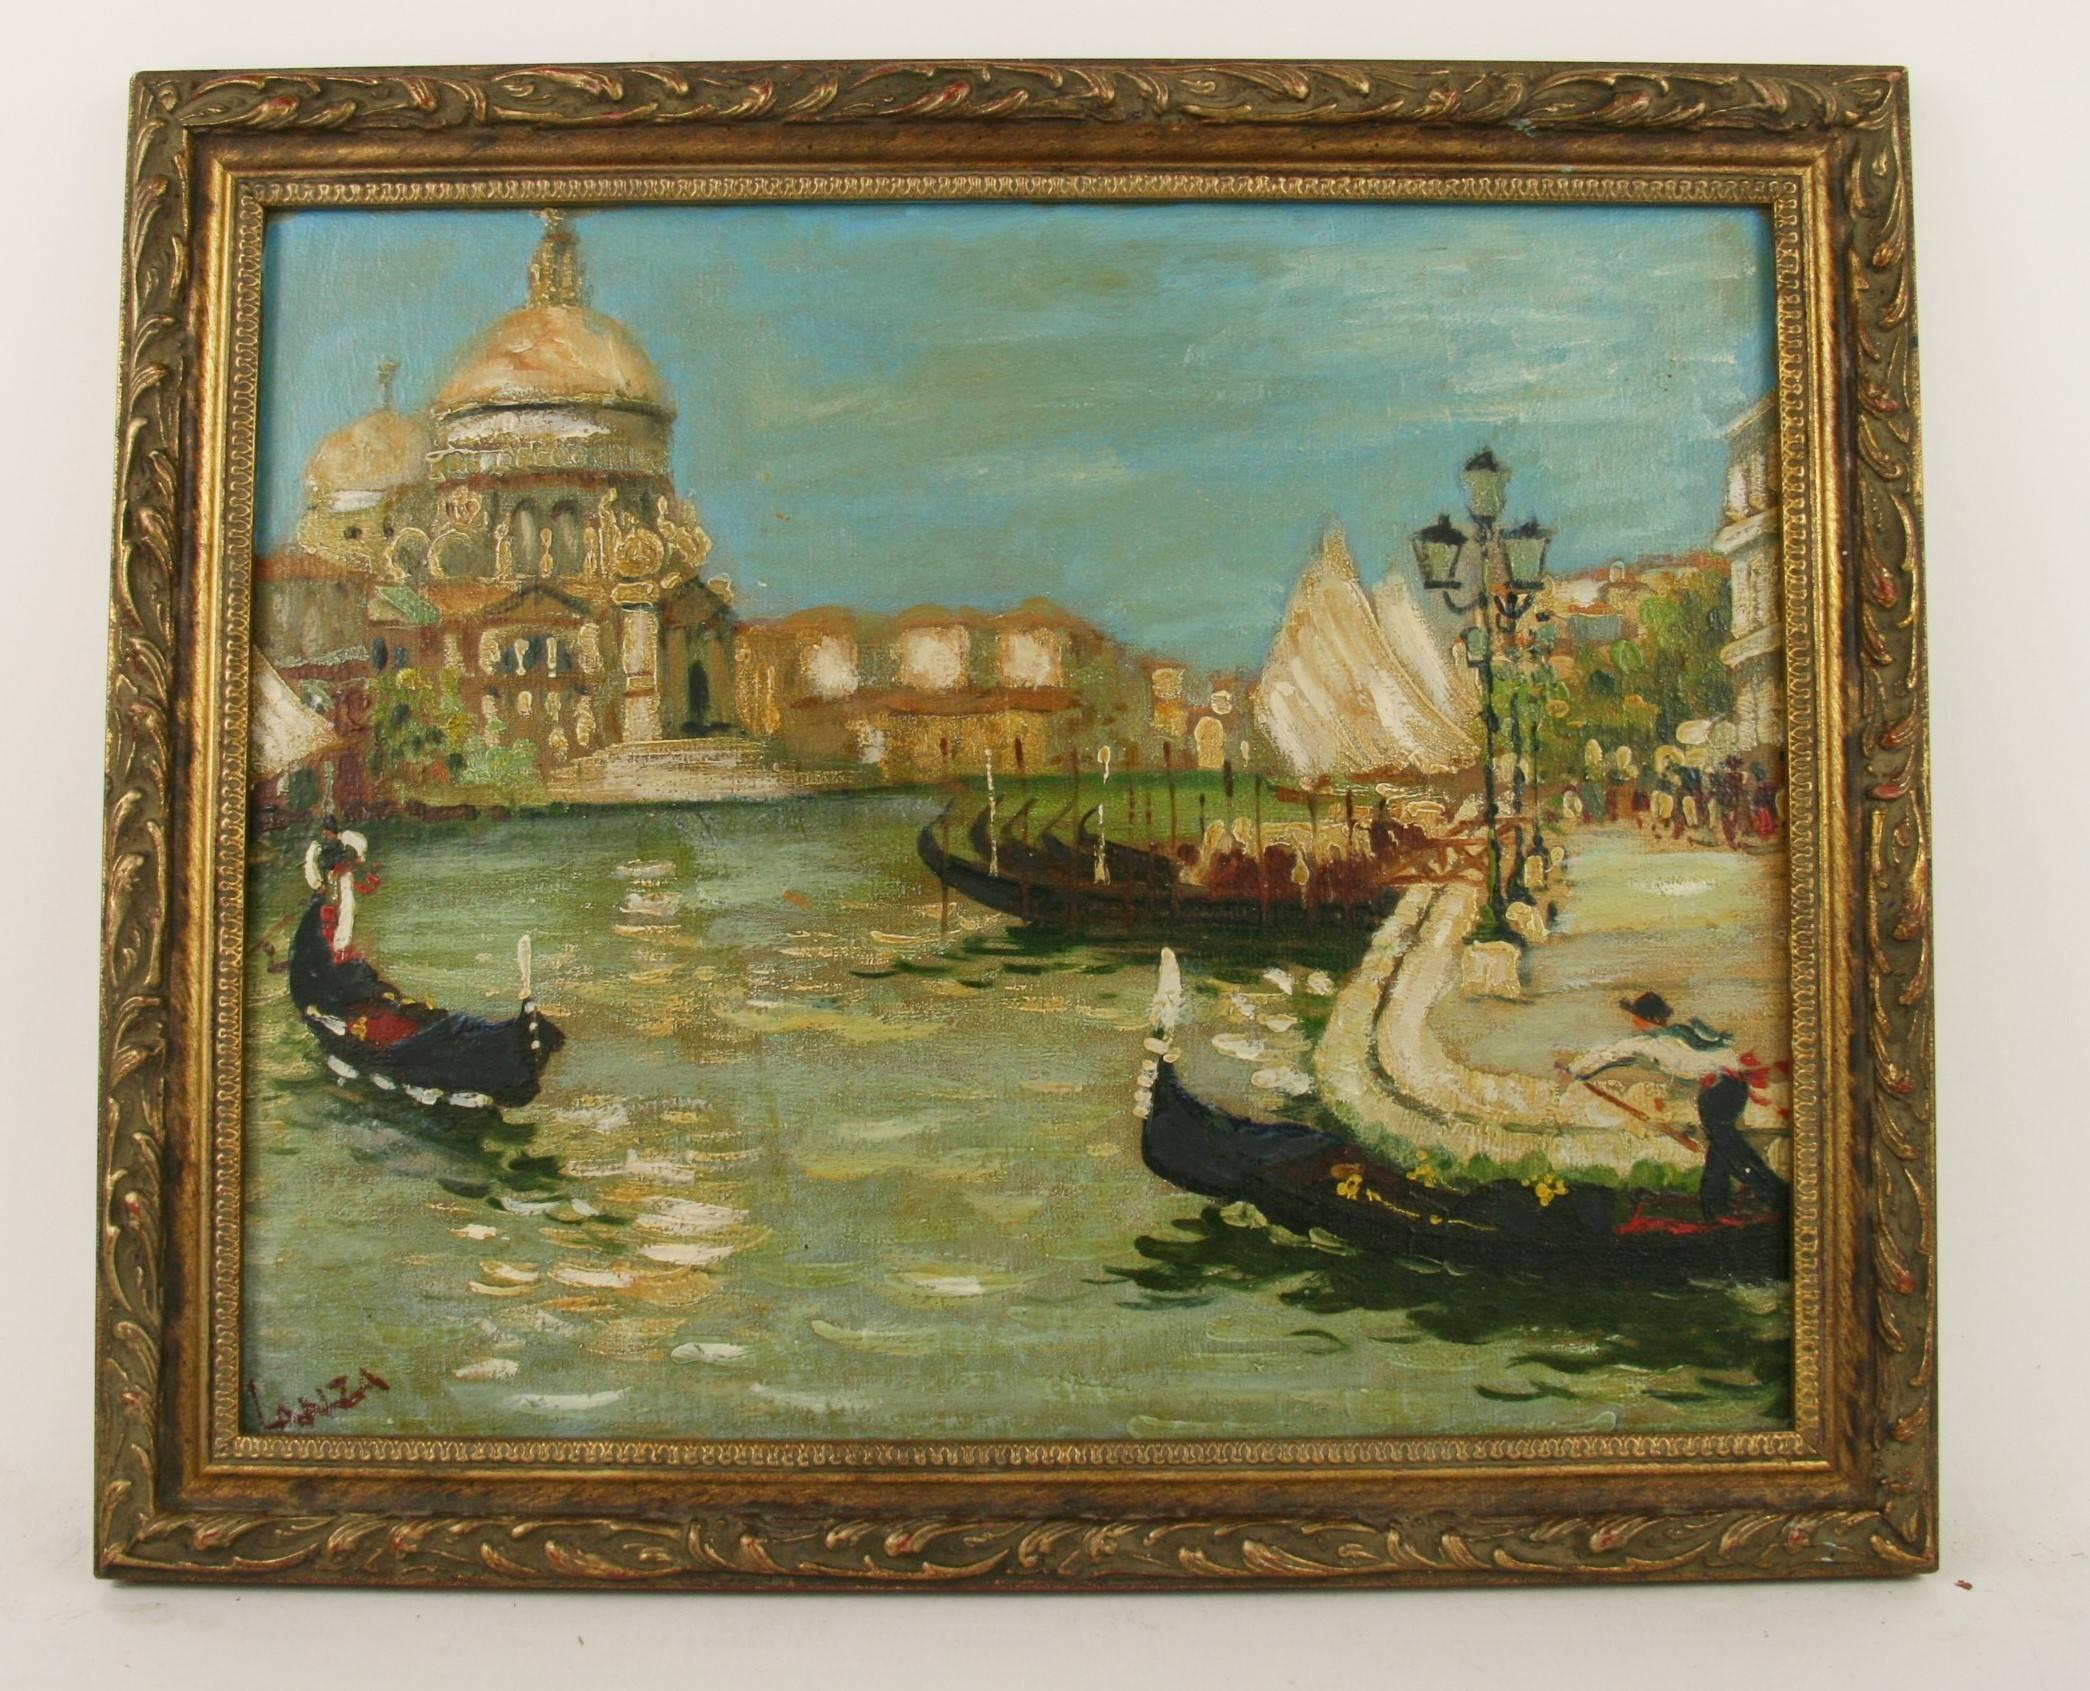 Oil on canvas applied to board in a vintage giltwood frame 
Image size 11x13.5